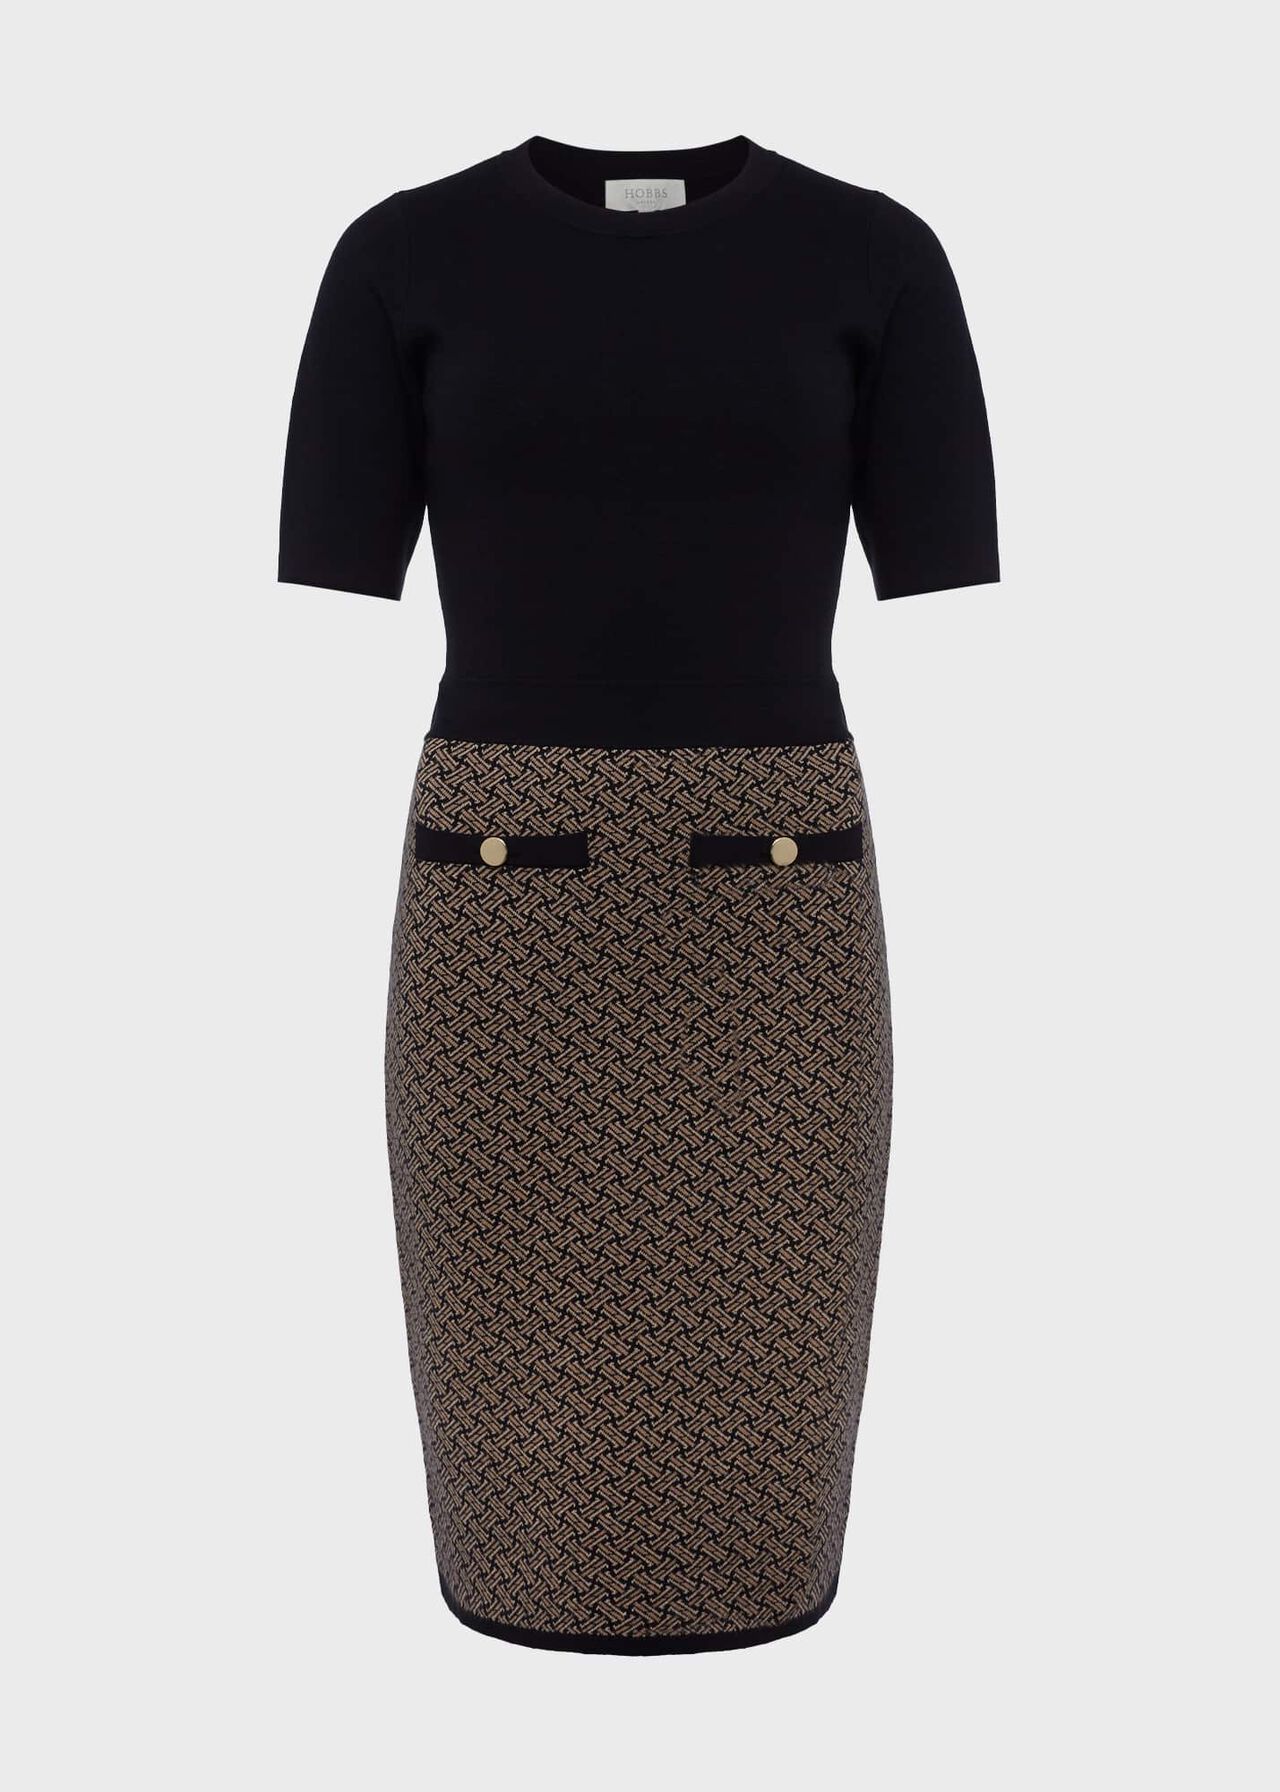 Perrie Knitted Dress, Navy Multi, hi-res